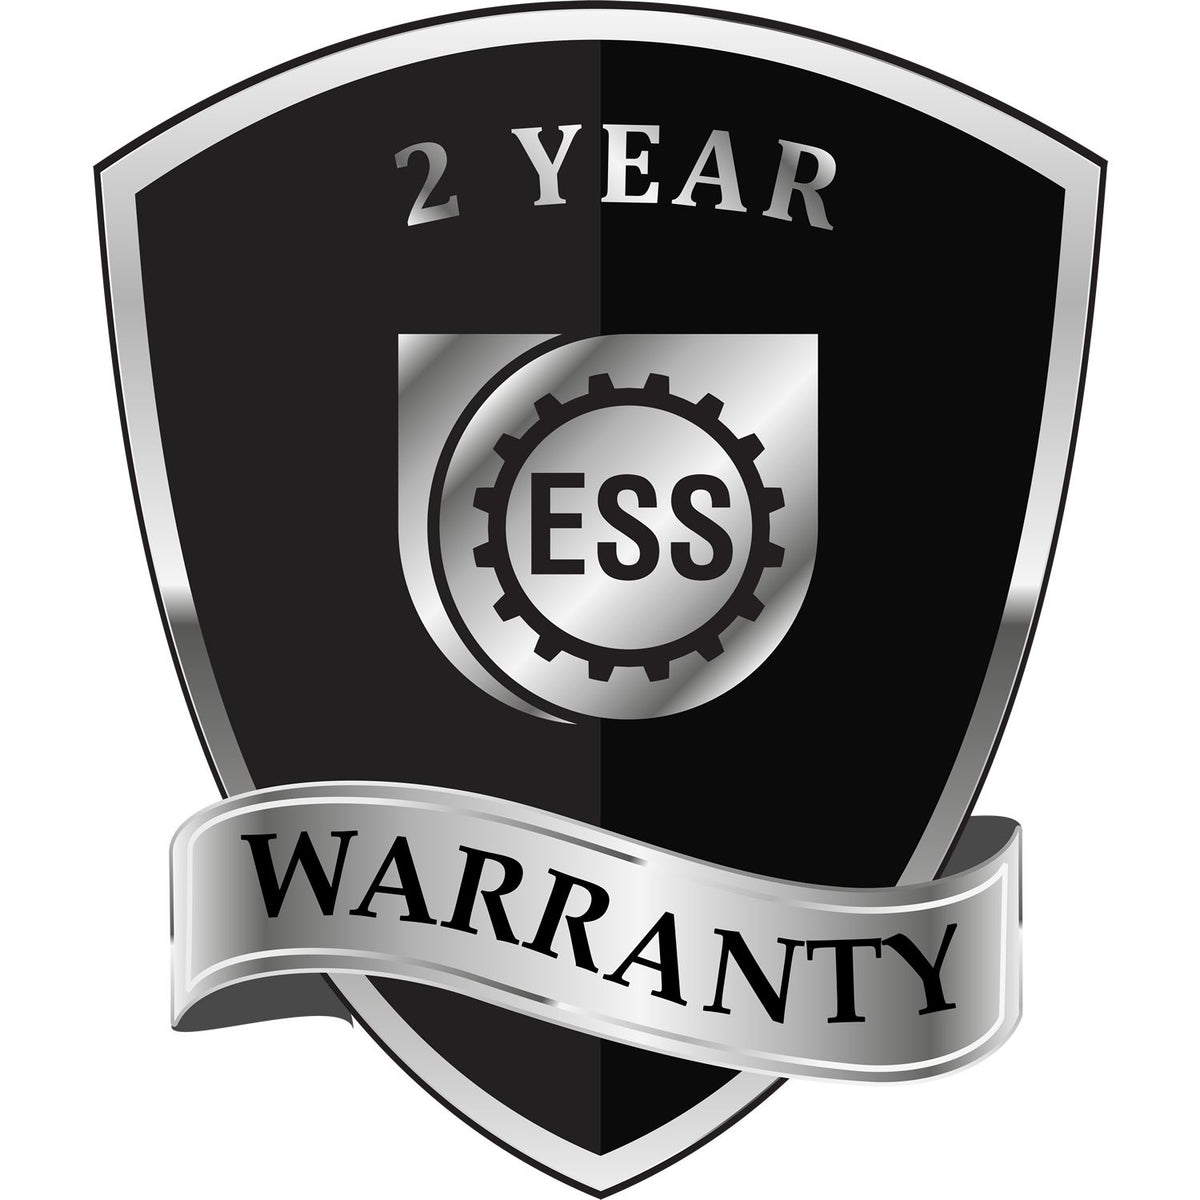 A black and silver badge or emblem showing warranty information for the Gift Idaho Landscape Architect Seal